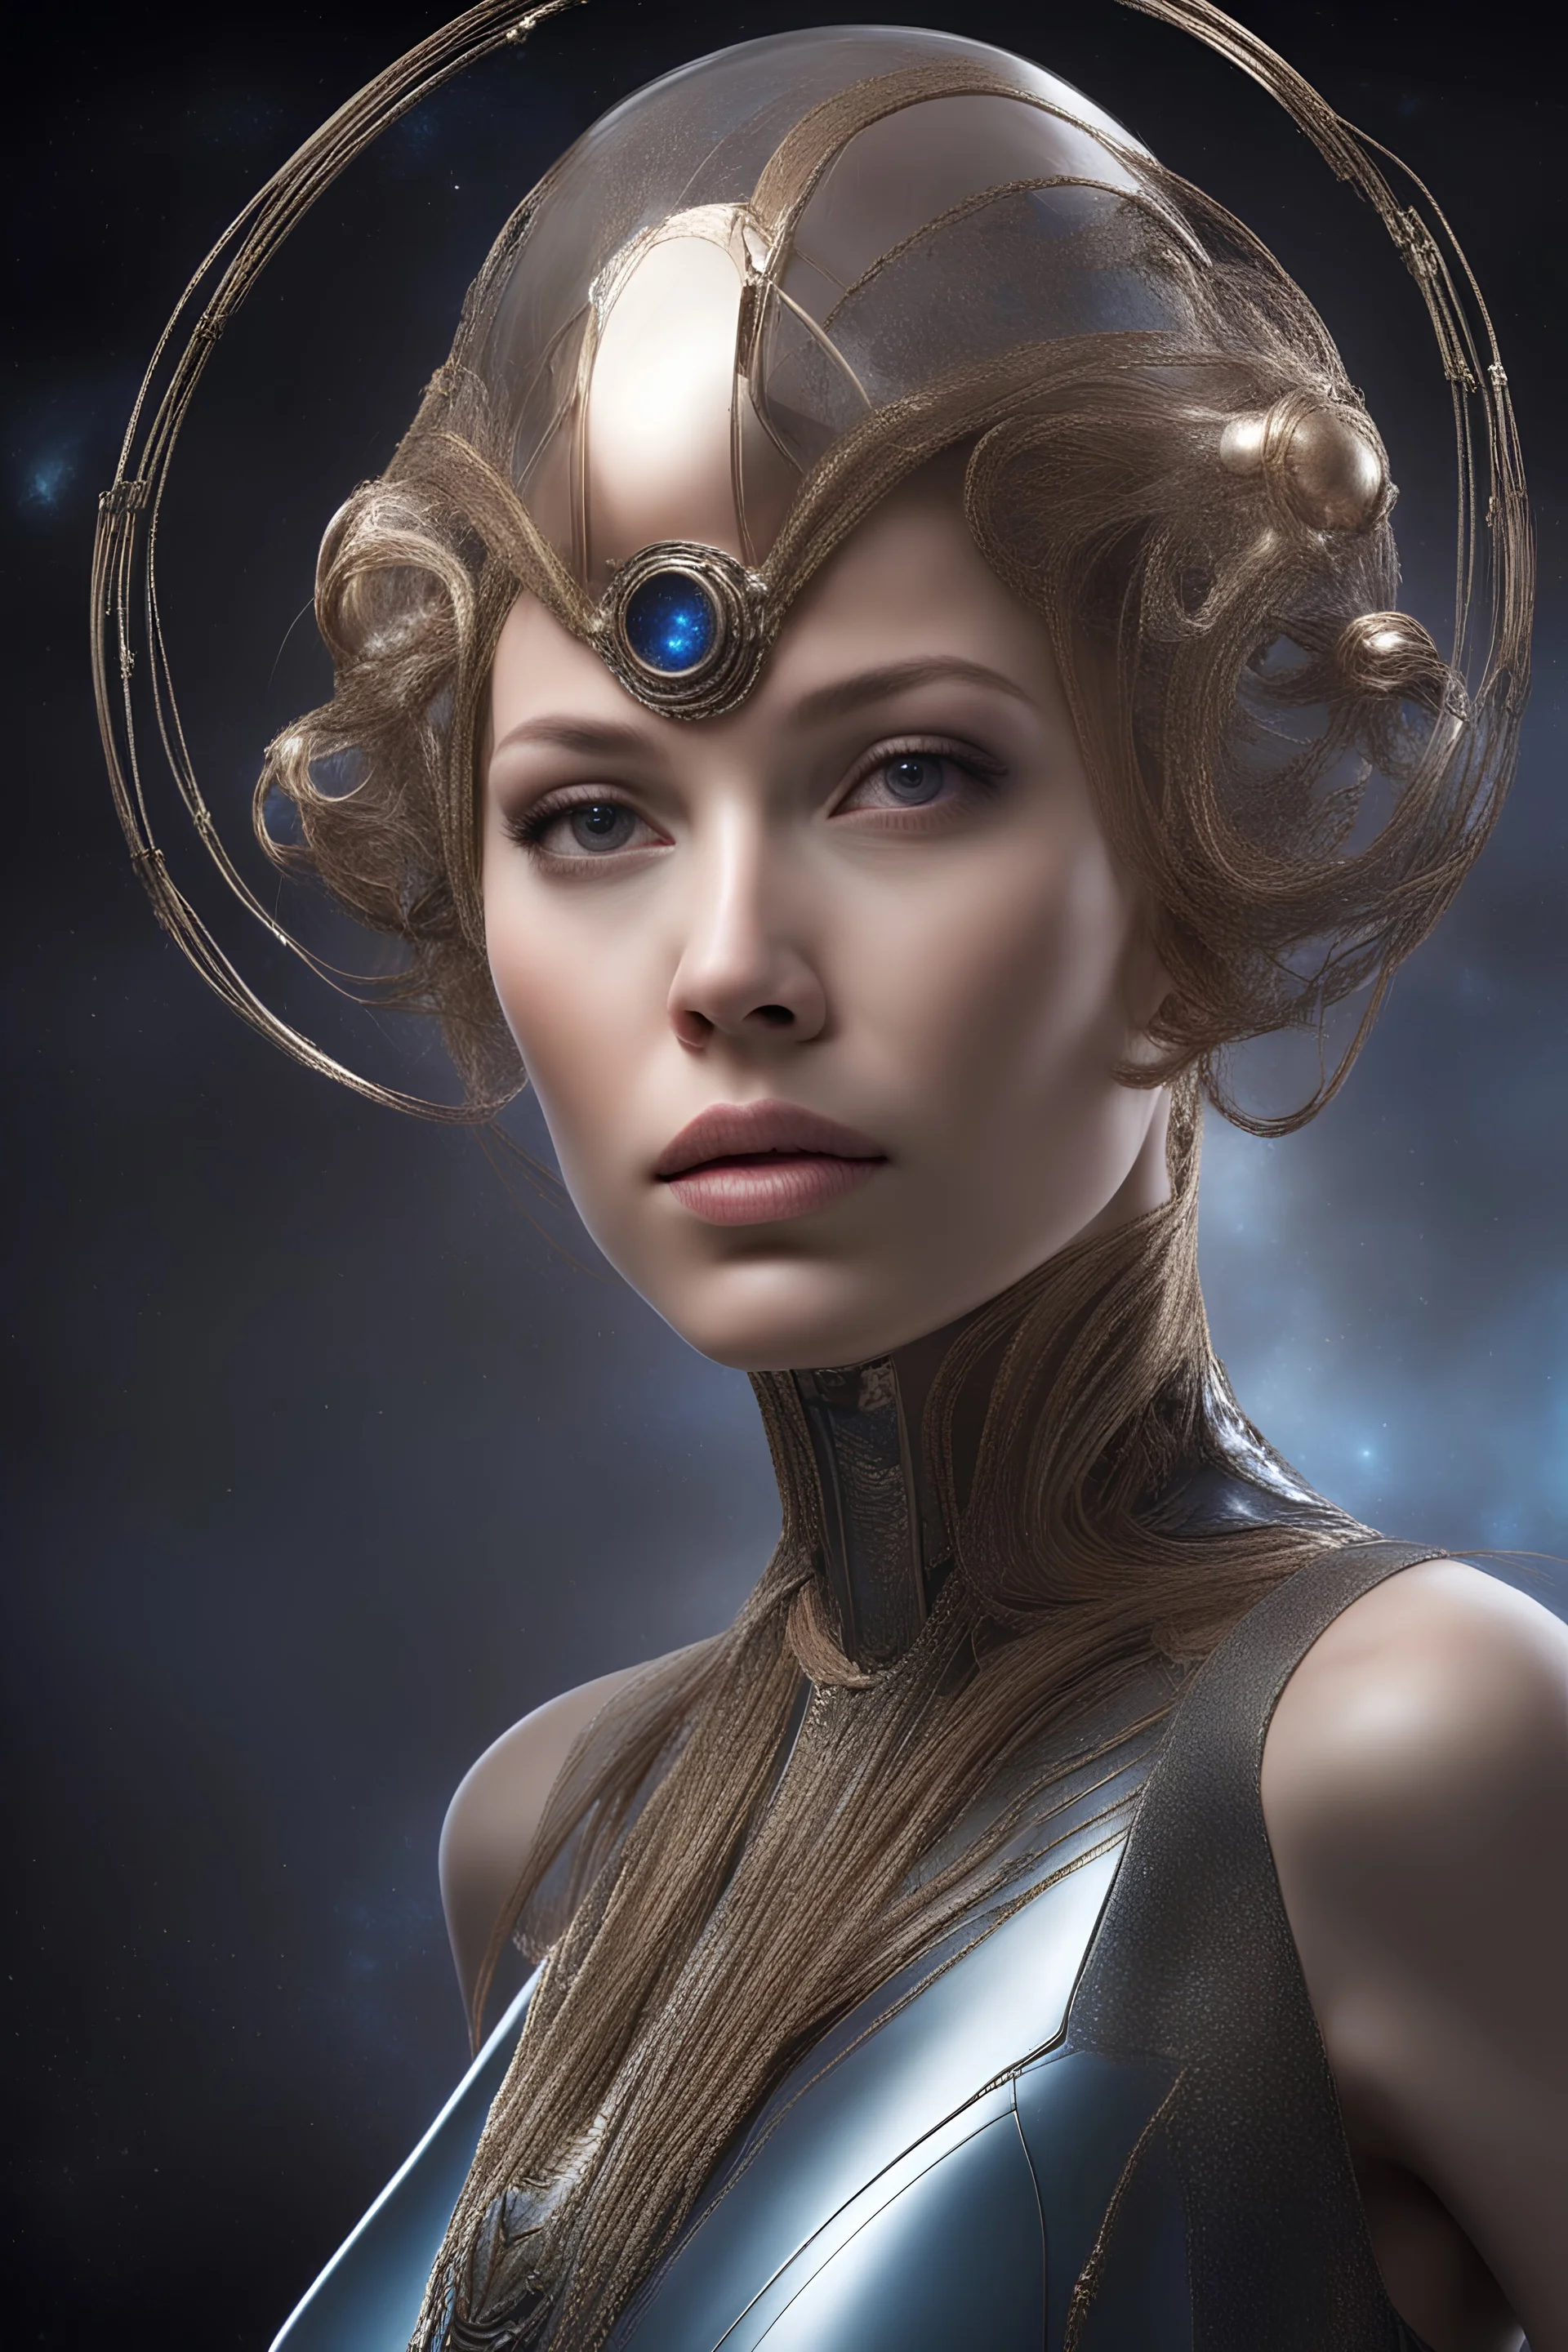 Head and shoulders image, A science-Fiction Space Opera - A long time ago in a galaxy far, far away there lived a tiny, thin, slender, little woman named Petra Payton, a voluptuous beauty , inspired by all the works of art in the world, Absolute Reality, Reality engine, Realistic stock photo 1080p, 32k UHD, Hyper realistic, photorealistic, well-shaped, perfect figure, perfect face, laughing, a multicolored, watercolor stained, wall in the background,